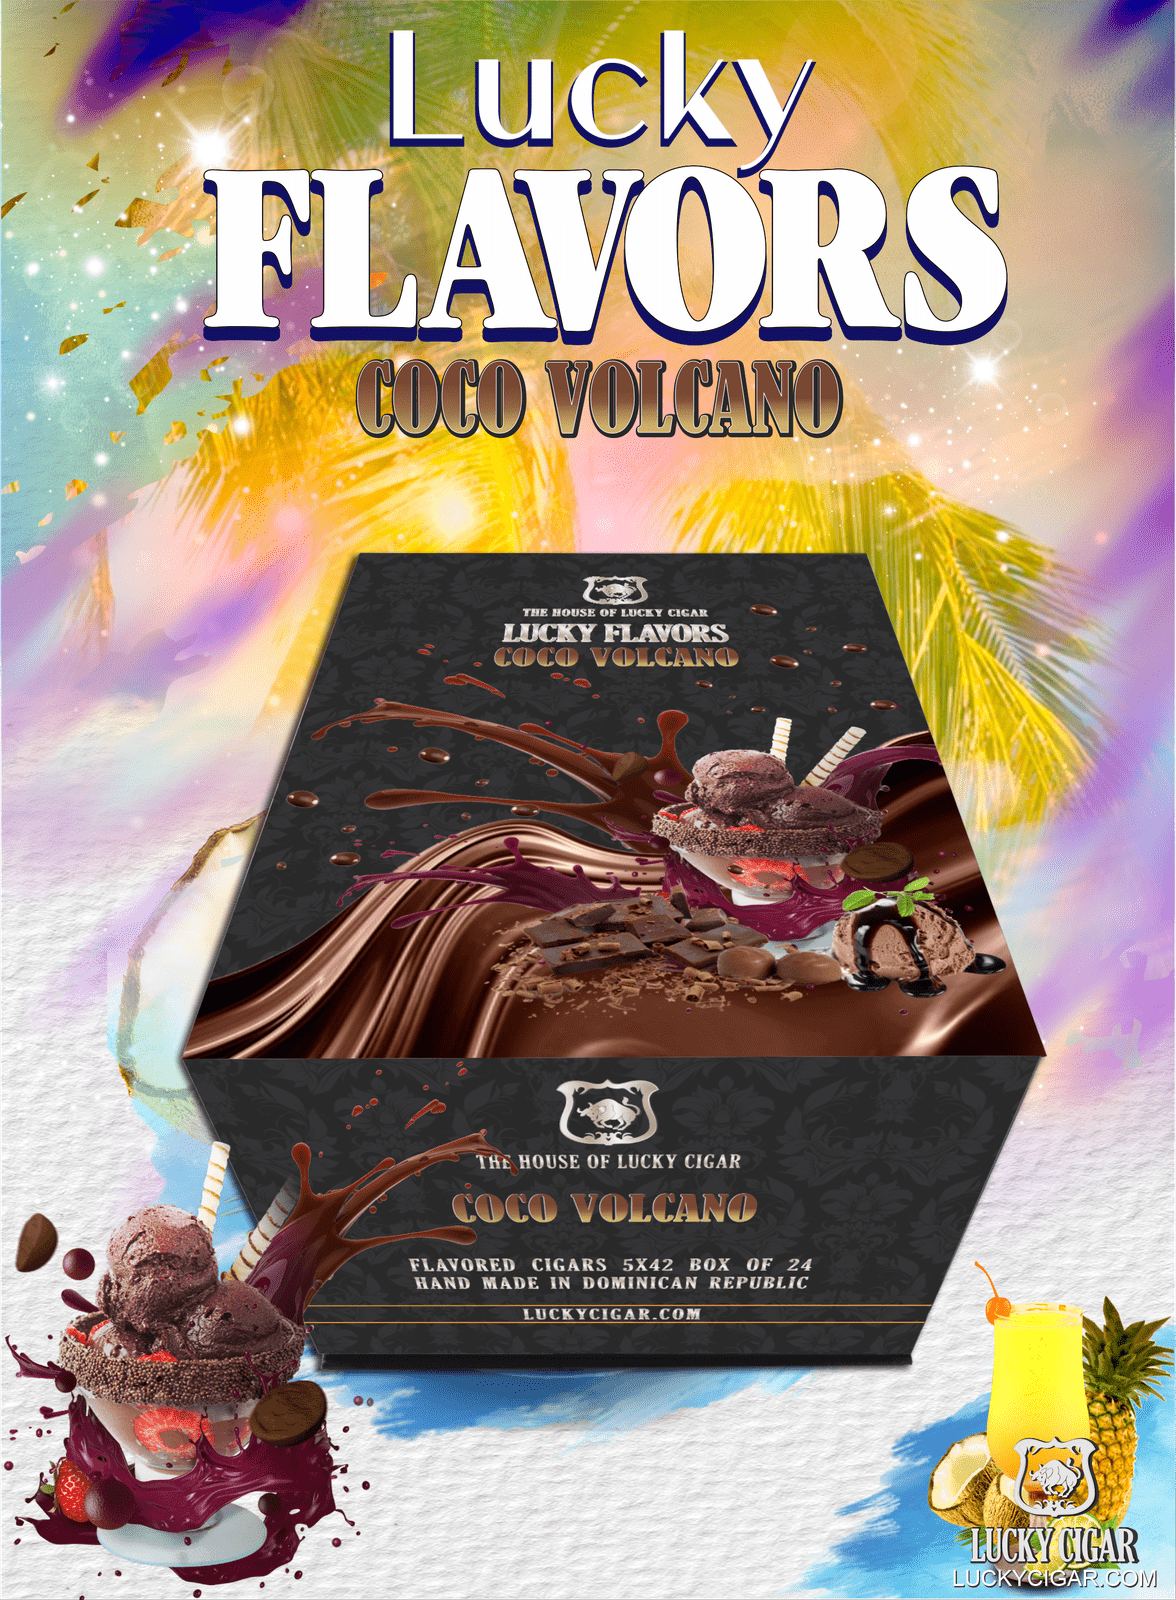 Flavored Cigars: Lucky Flavors coco volcano  5x42 Box of 24